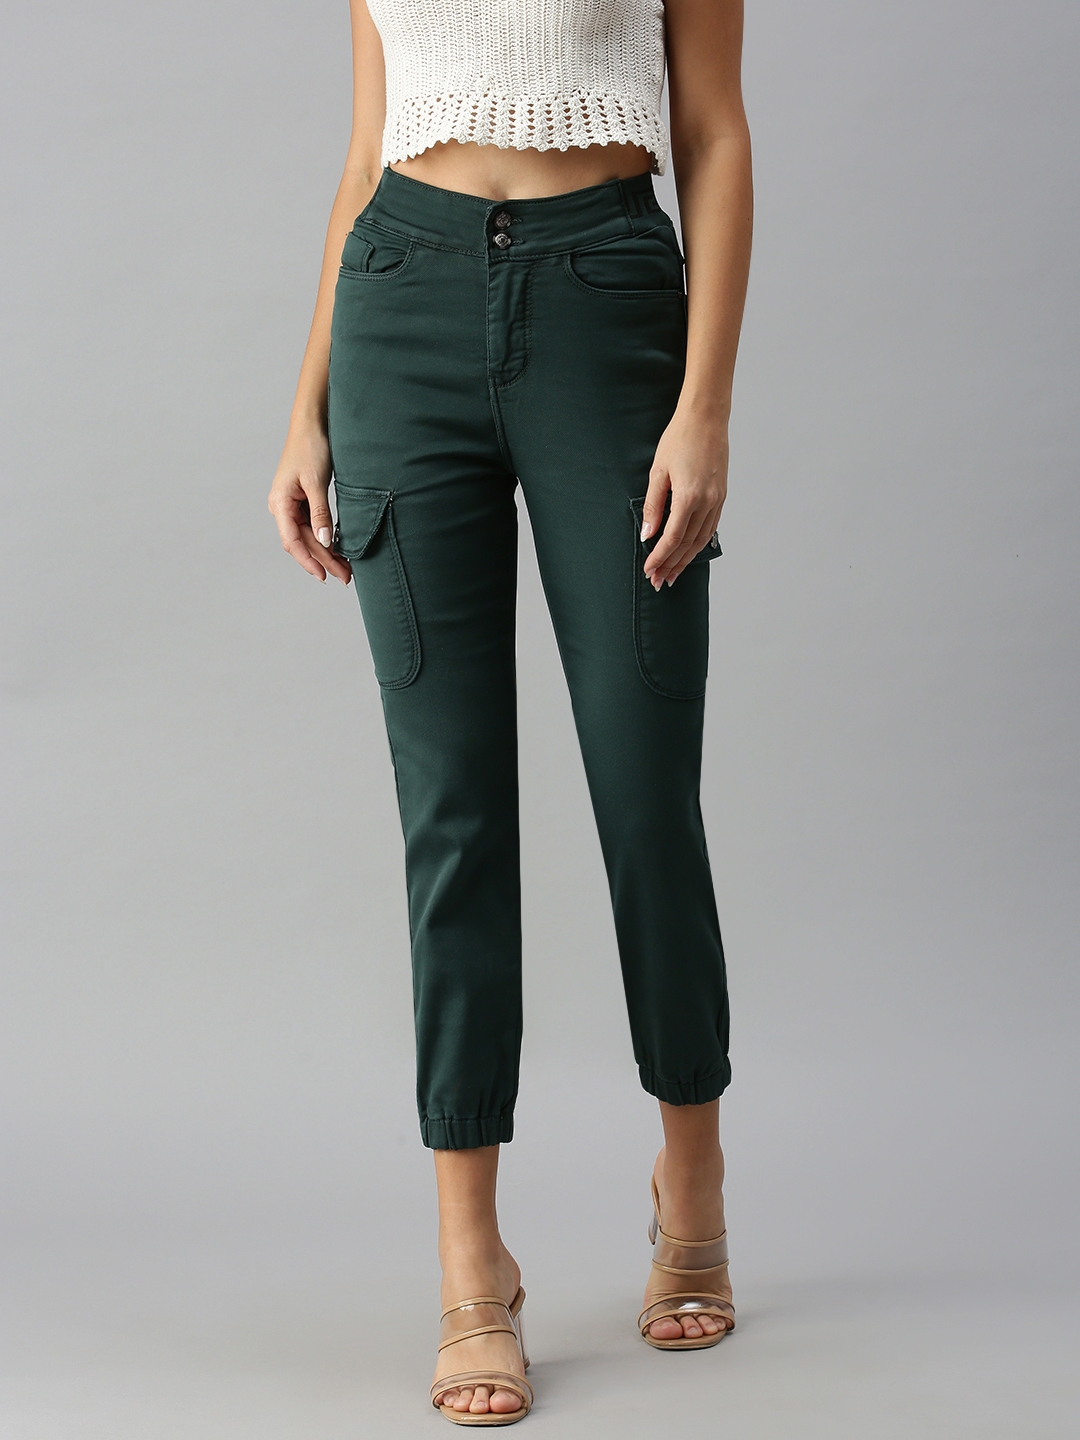 Showoff Women's Jogger Clean Look Green Jeans